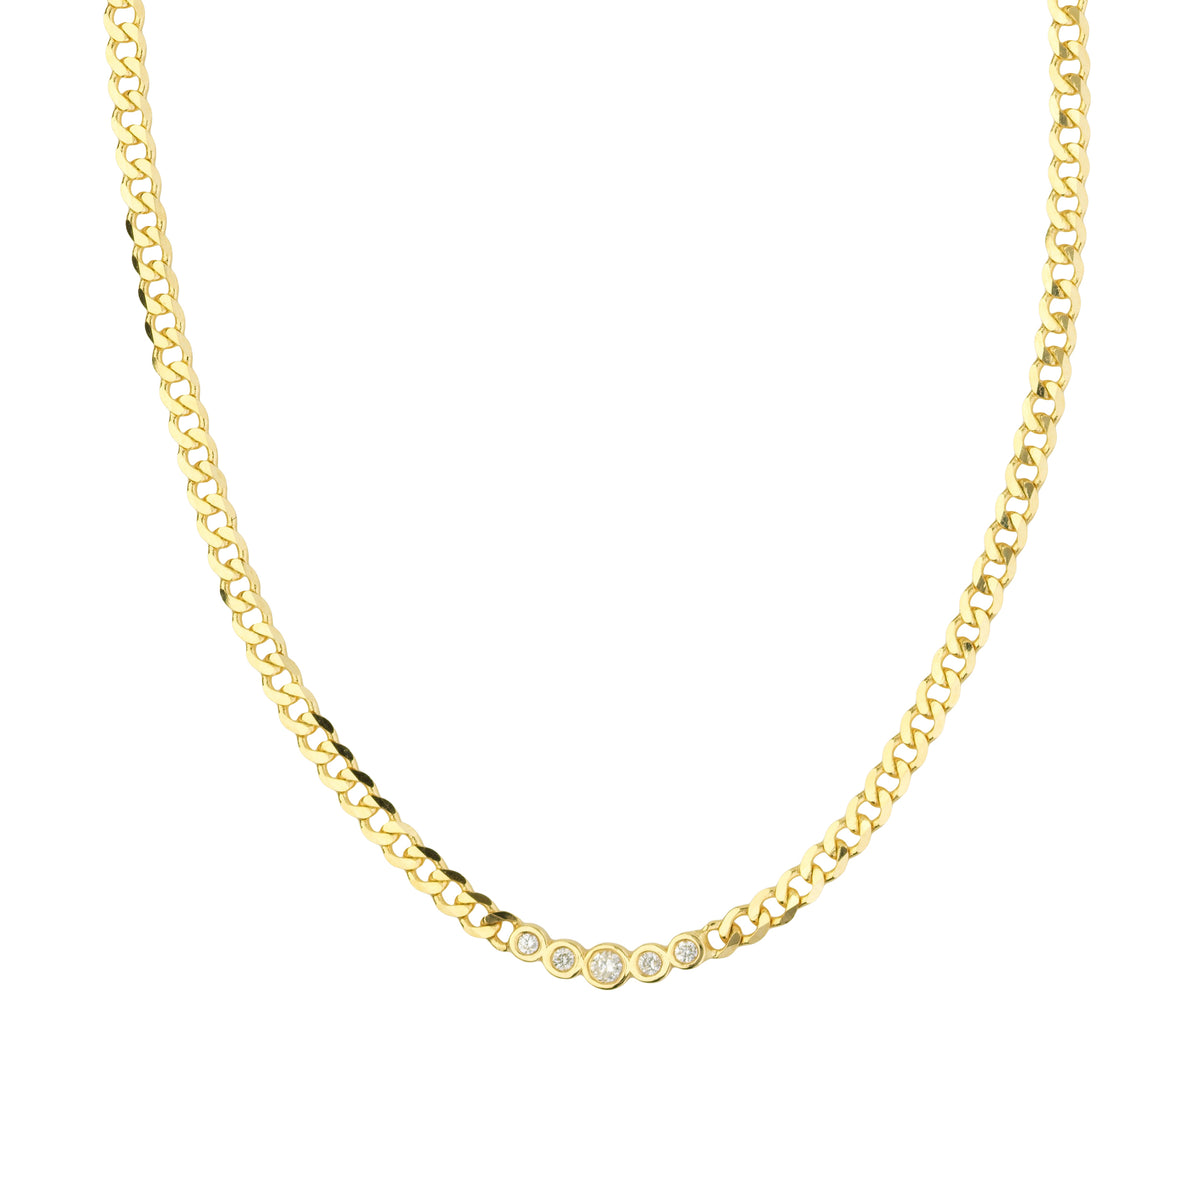 14k yellow gold 18inch curb link chain with five round bezel set diamonds 